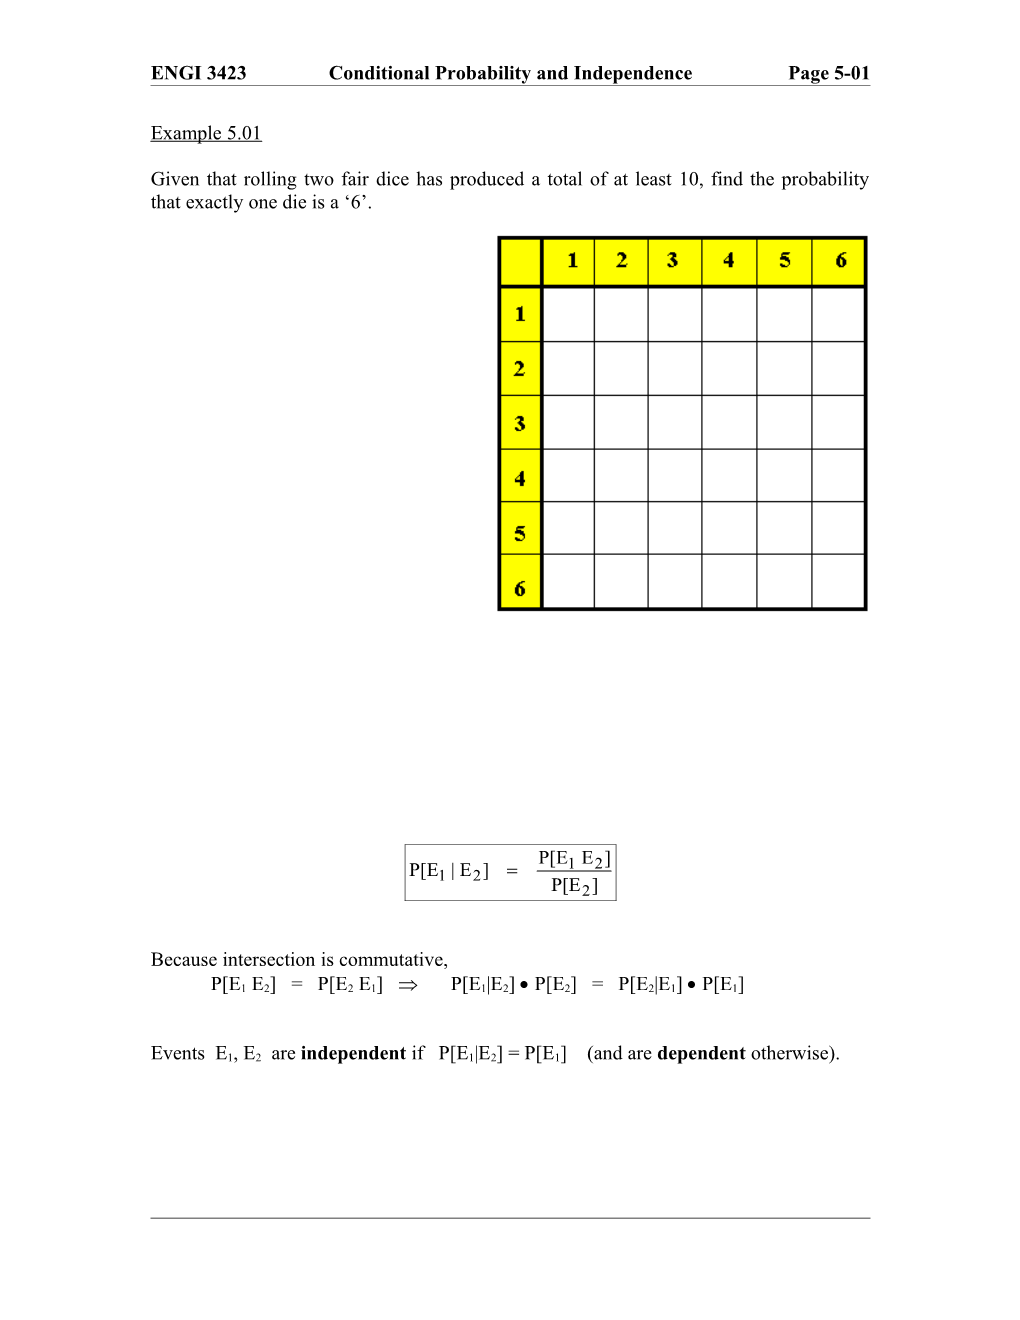 ENGI 3423 Conditional Probability and Independence Page 5-02